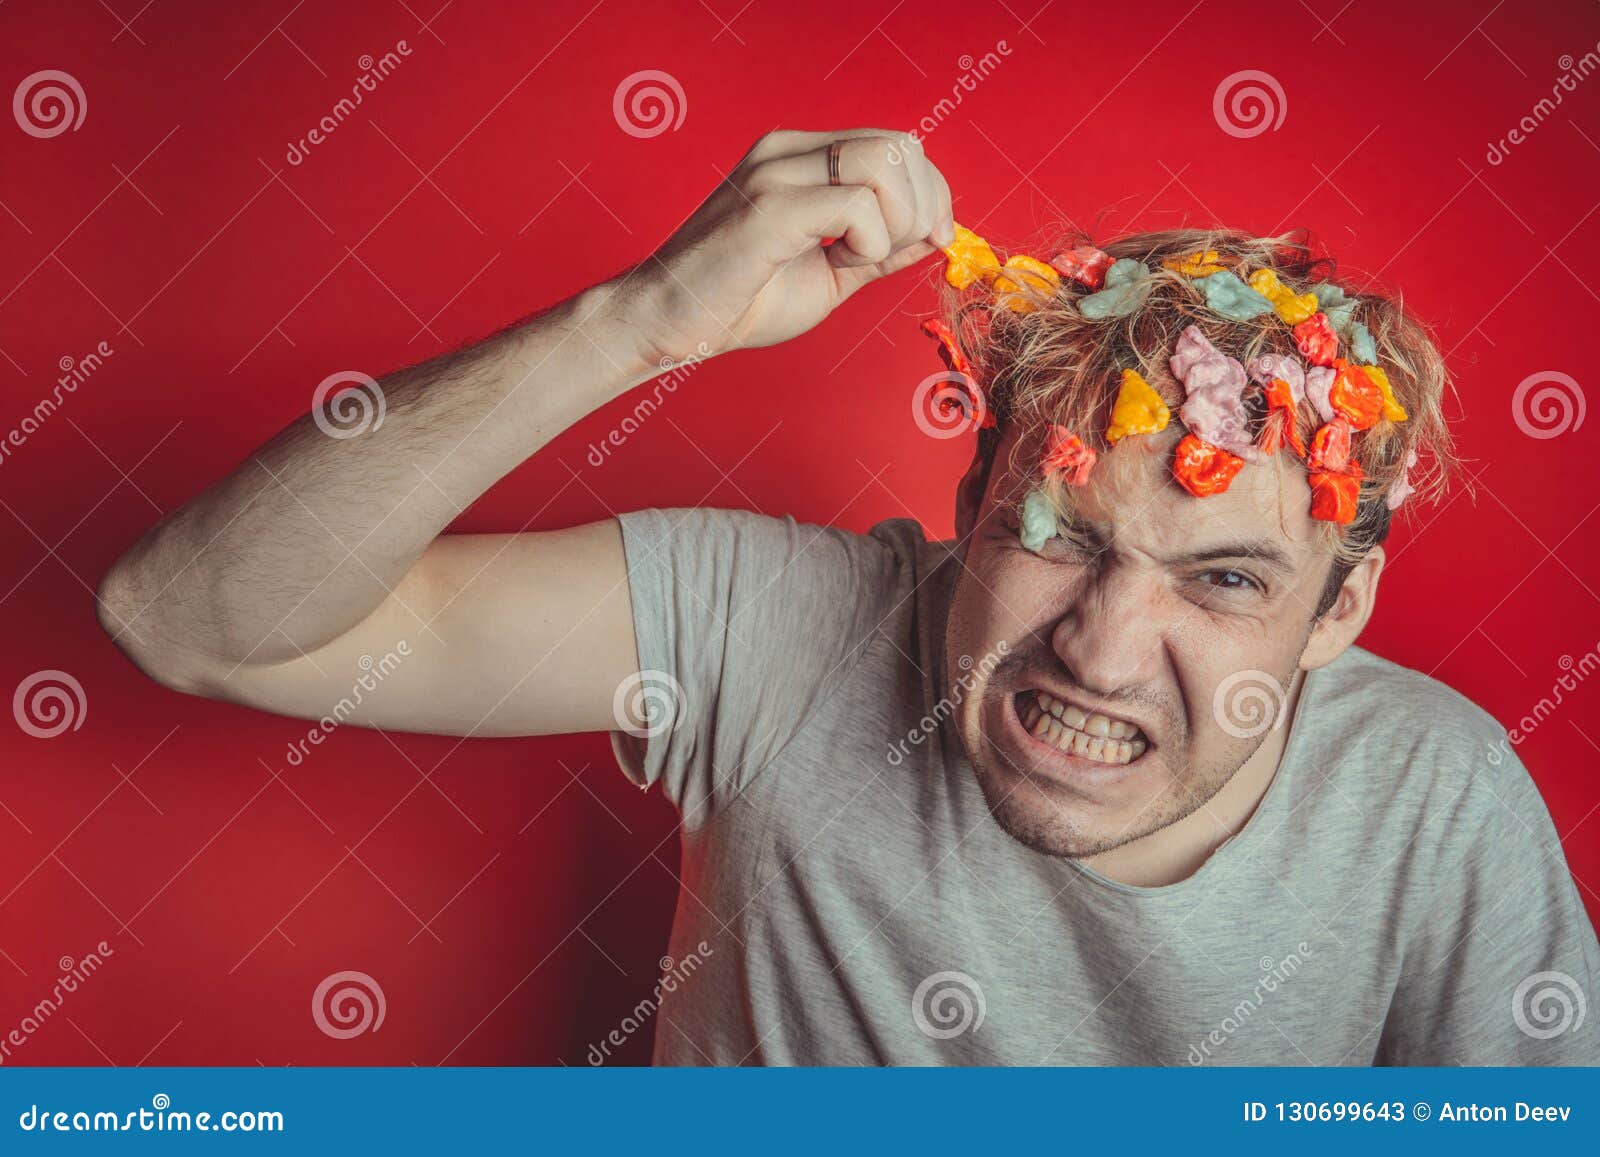 Gum in His Head. Portrait of Man with Chewing Gum in His Head. Man with Hair  Covered in Food Stock Image - Image of crime, experience: 130699643